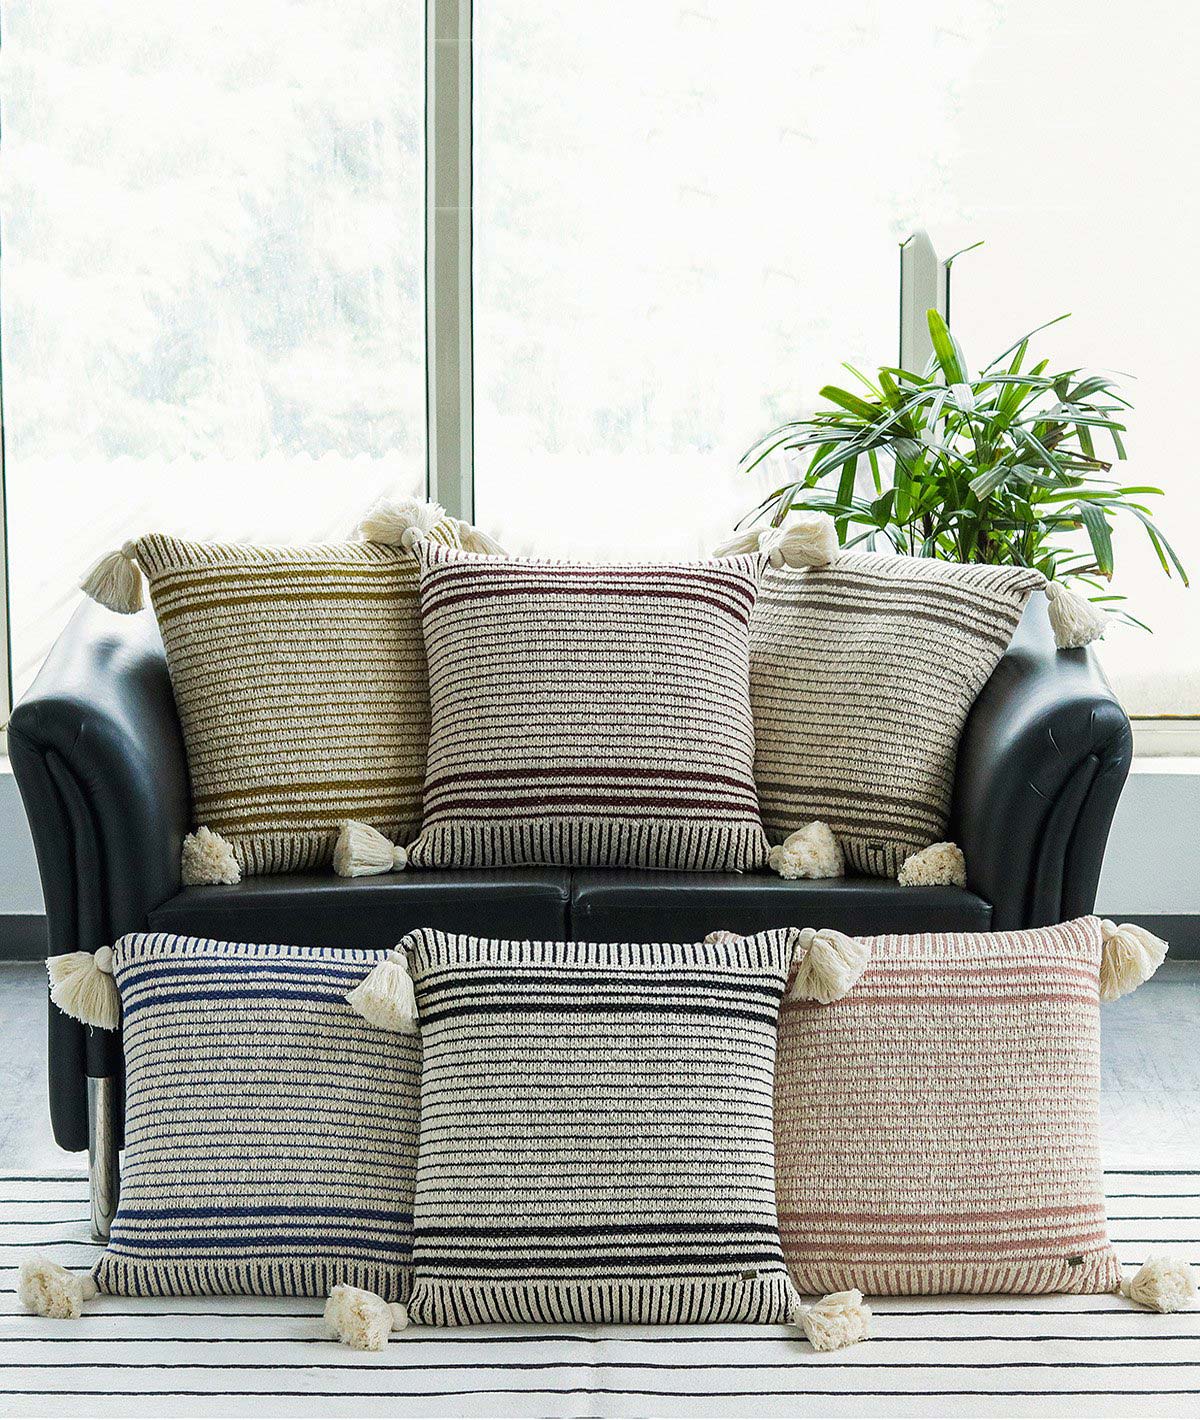 Stripe Square Cotton Knitted Decorative Natural & Black Color 18 x 18 Inches Cushion Cover